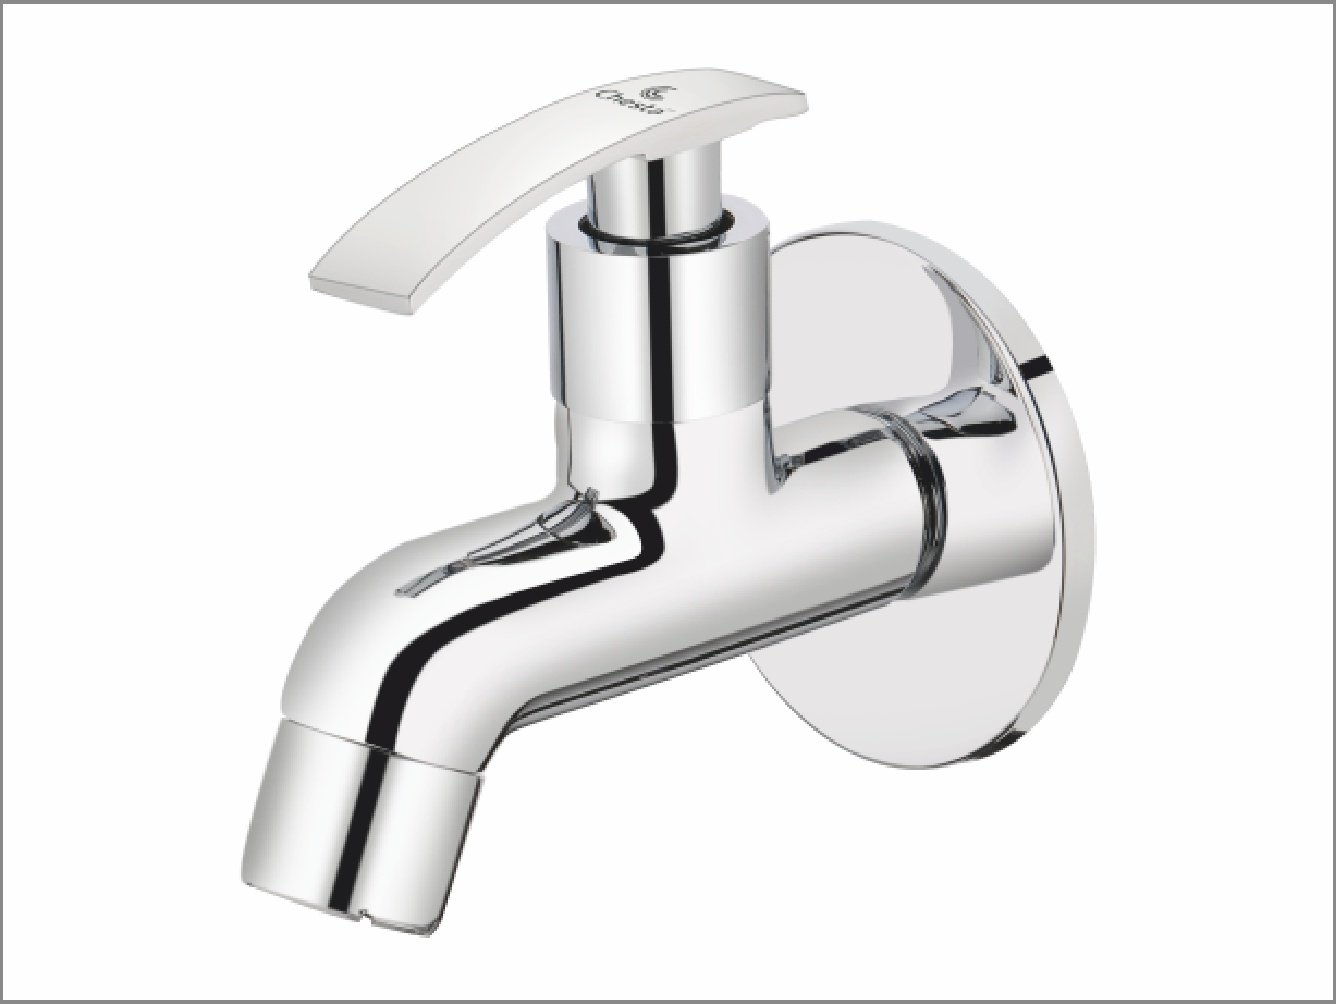 HR - 1001 - Bib Cock with Wall Flange at Chesta Bath Fittings